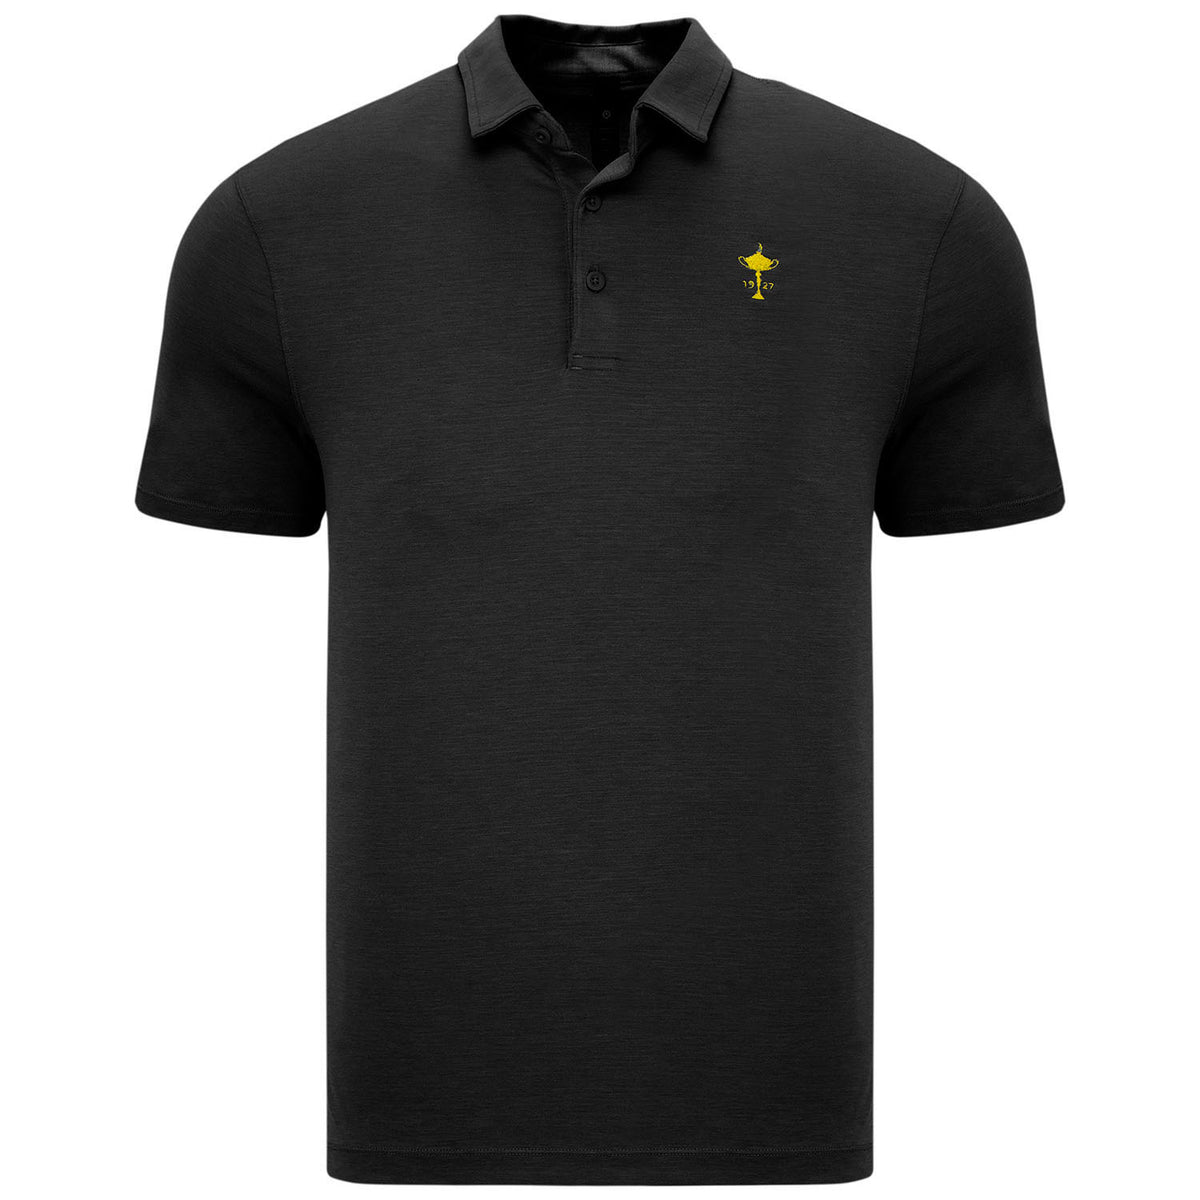 Ryder Cup lululemon Evolution Polo in Black- Front View